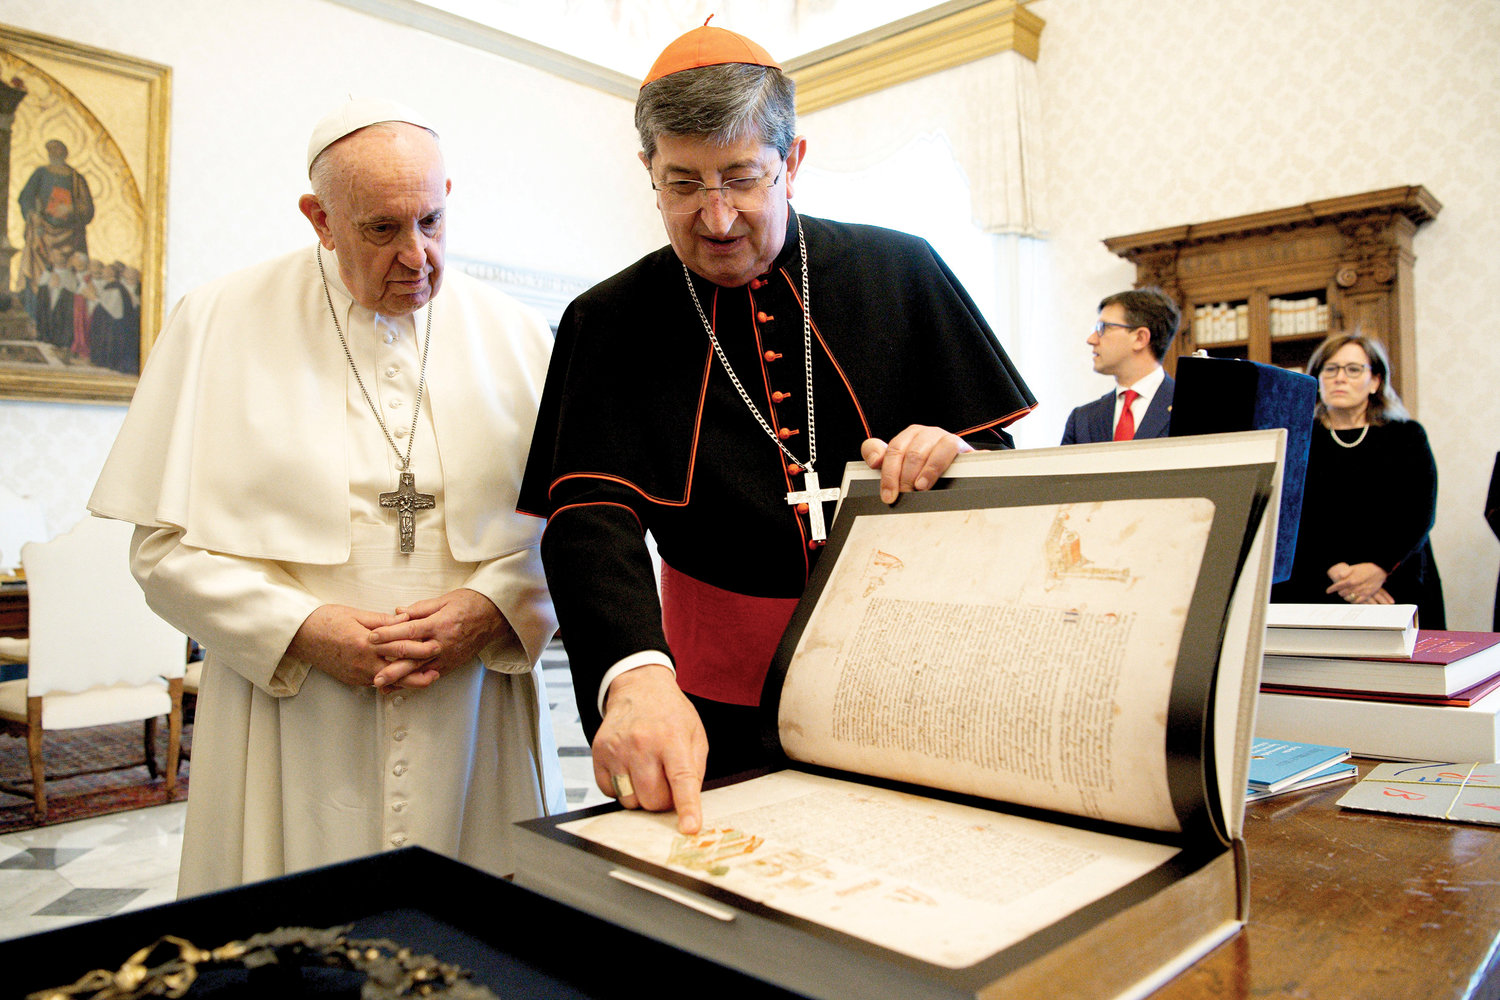 Pope Francis reviews materials related to Italian poet Dante Alighieri with Cardinal Giuseppe Betori of Florence, Italy, and a delegation from Florence during an audience at the Vatican June 4. The pope calls Dante a “prophet of hope.” The group was marking the 700th anniversary of Alighieri's death, which will take place Sept. 13.